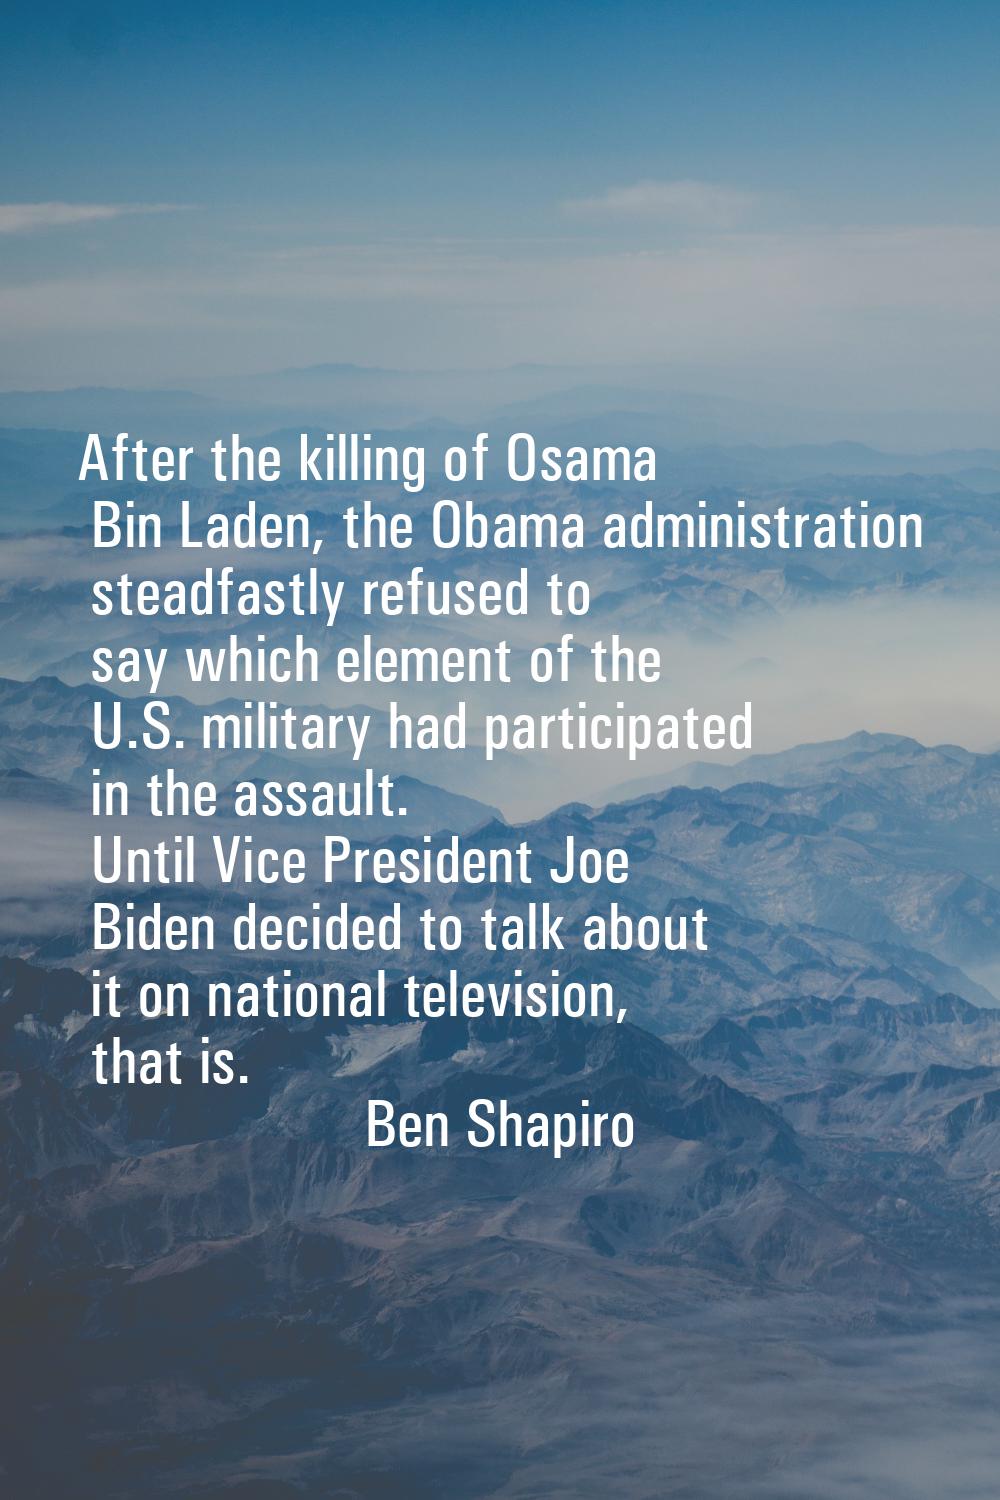 After the killing of Osama Bin Laden, the Obama administration steadfastly refused to say which ele